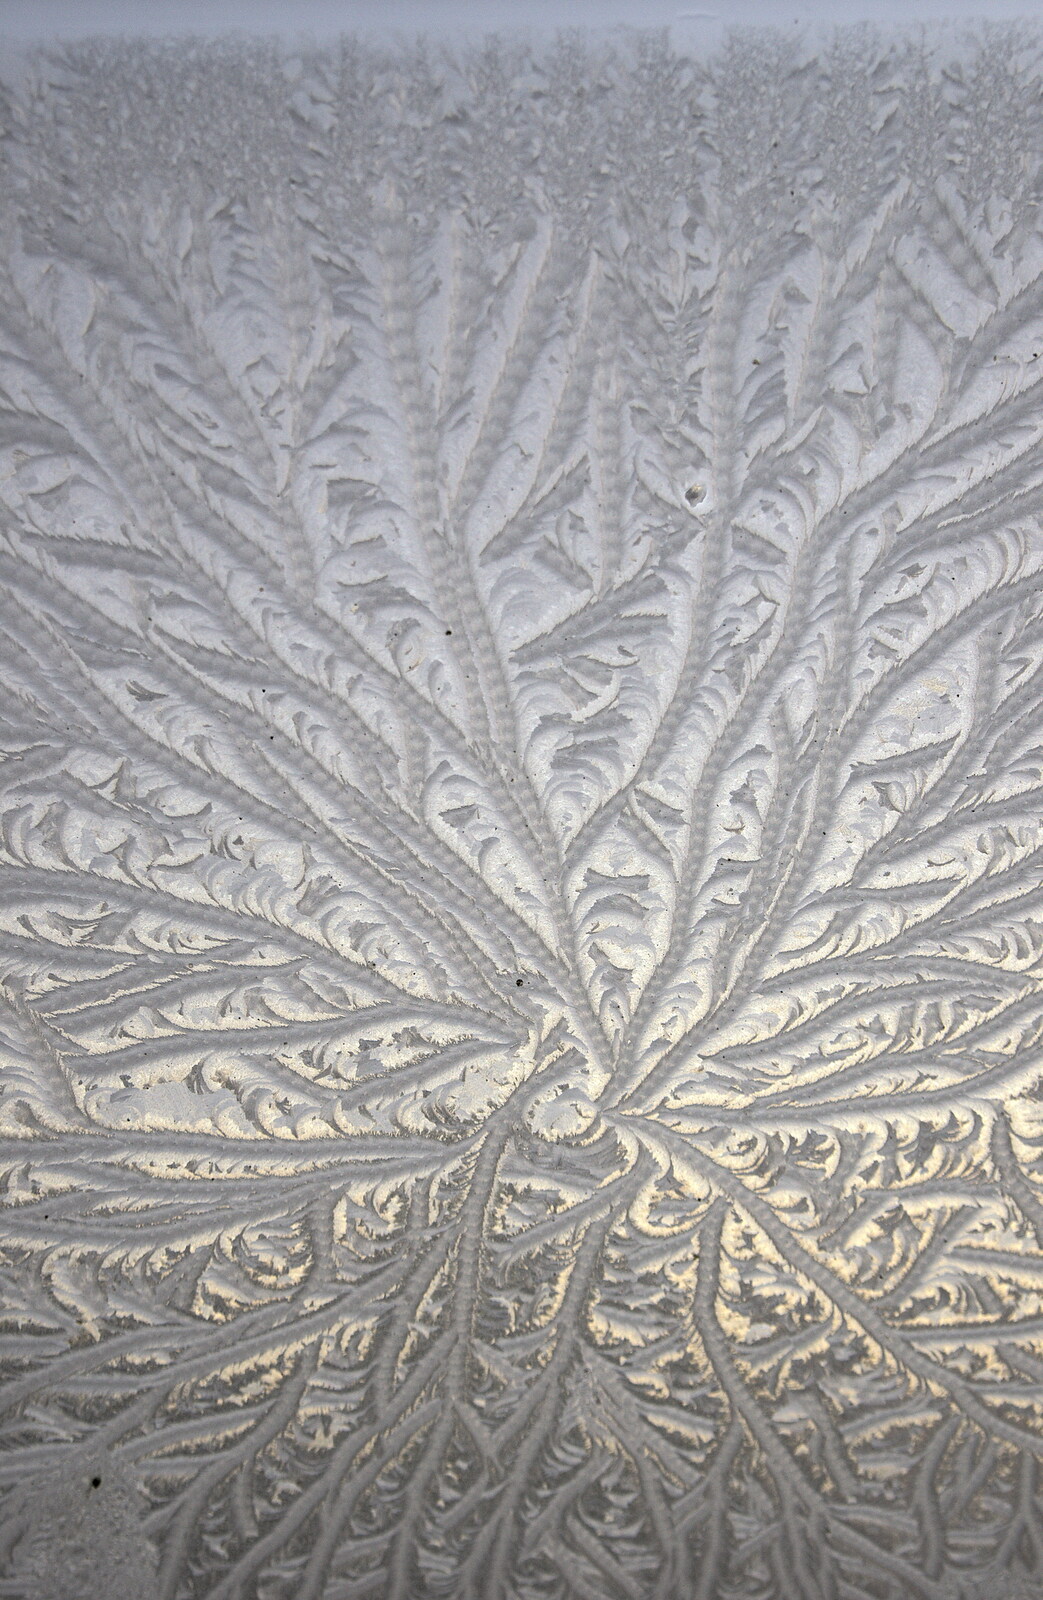 Amazing ice patterns on the office Velux     from A Trip to Norwich, and Beers at The Swan Inn, Brome, Suffolk - 5th January 2015